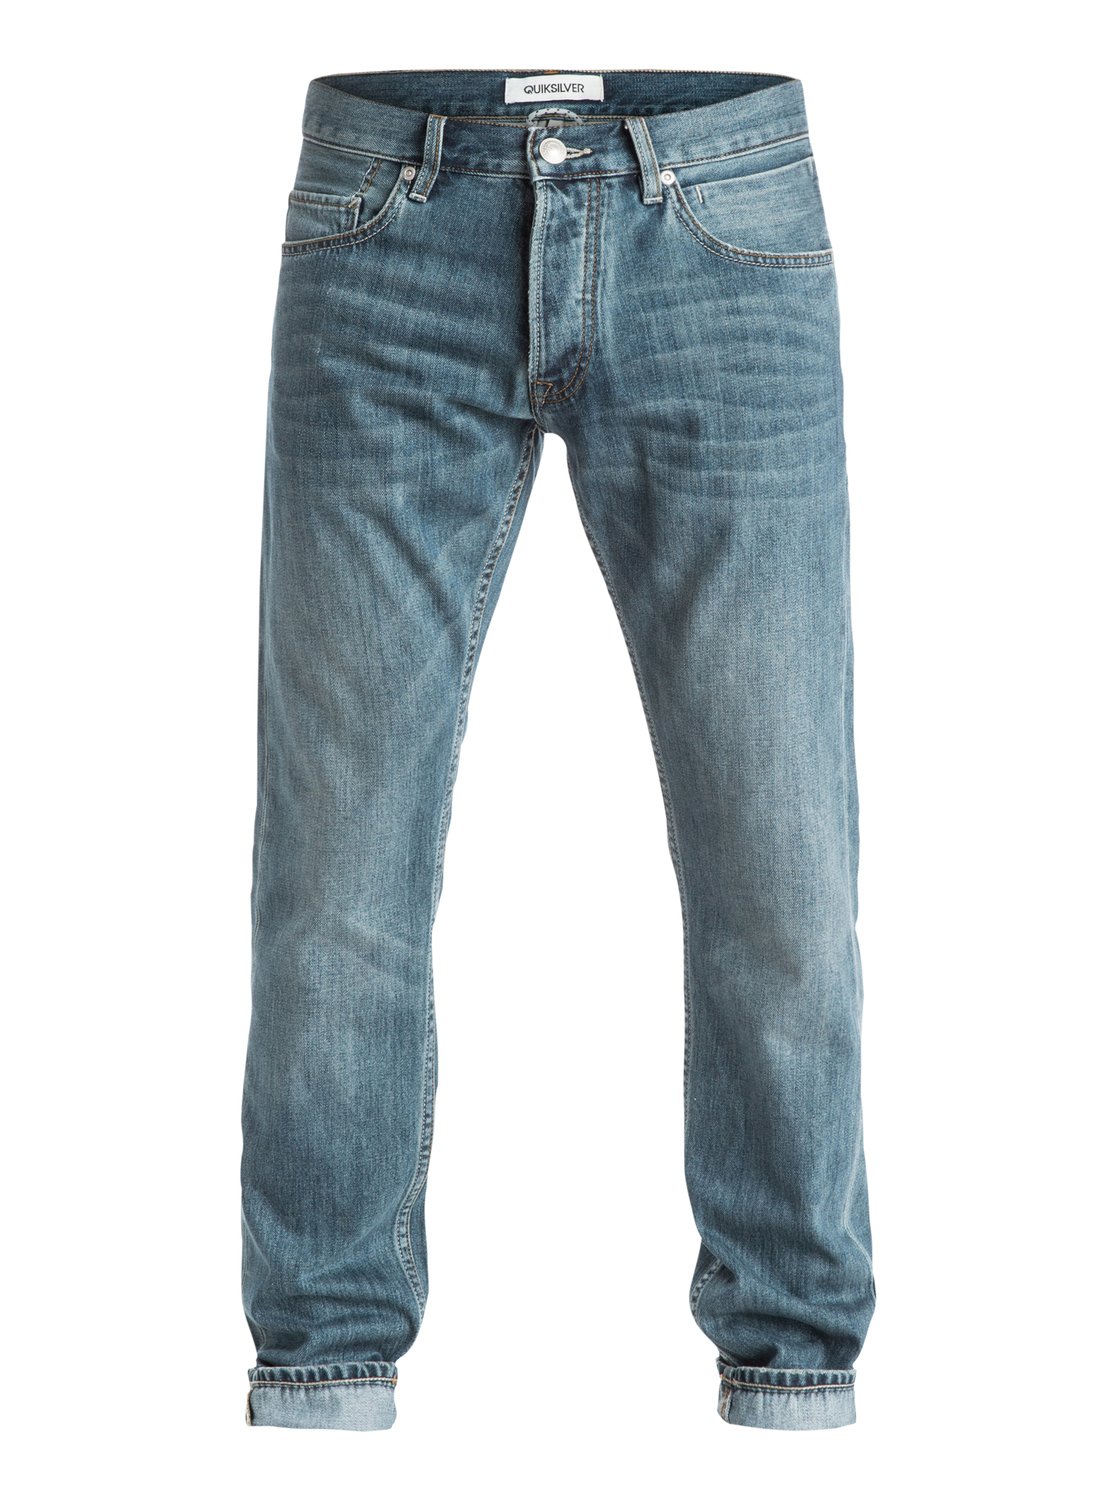 Revolver Best 34 - Straight Fit Jeans - Quiksilver<br>